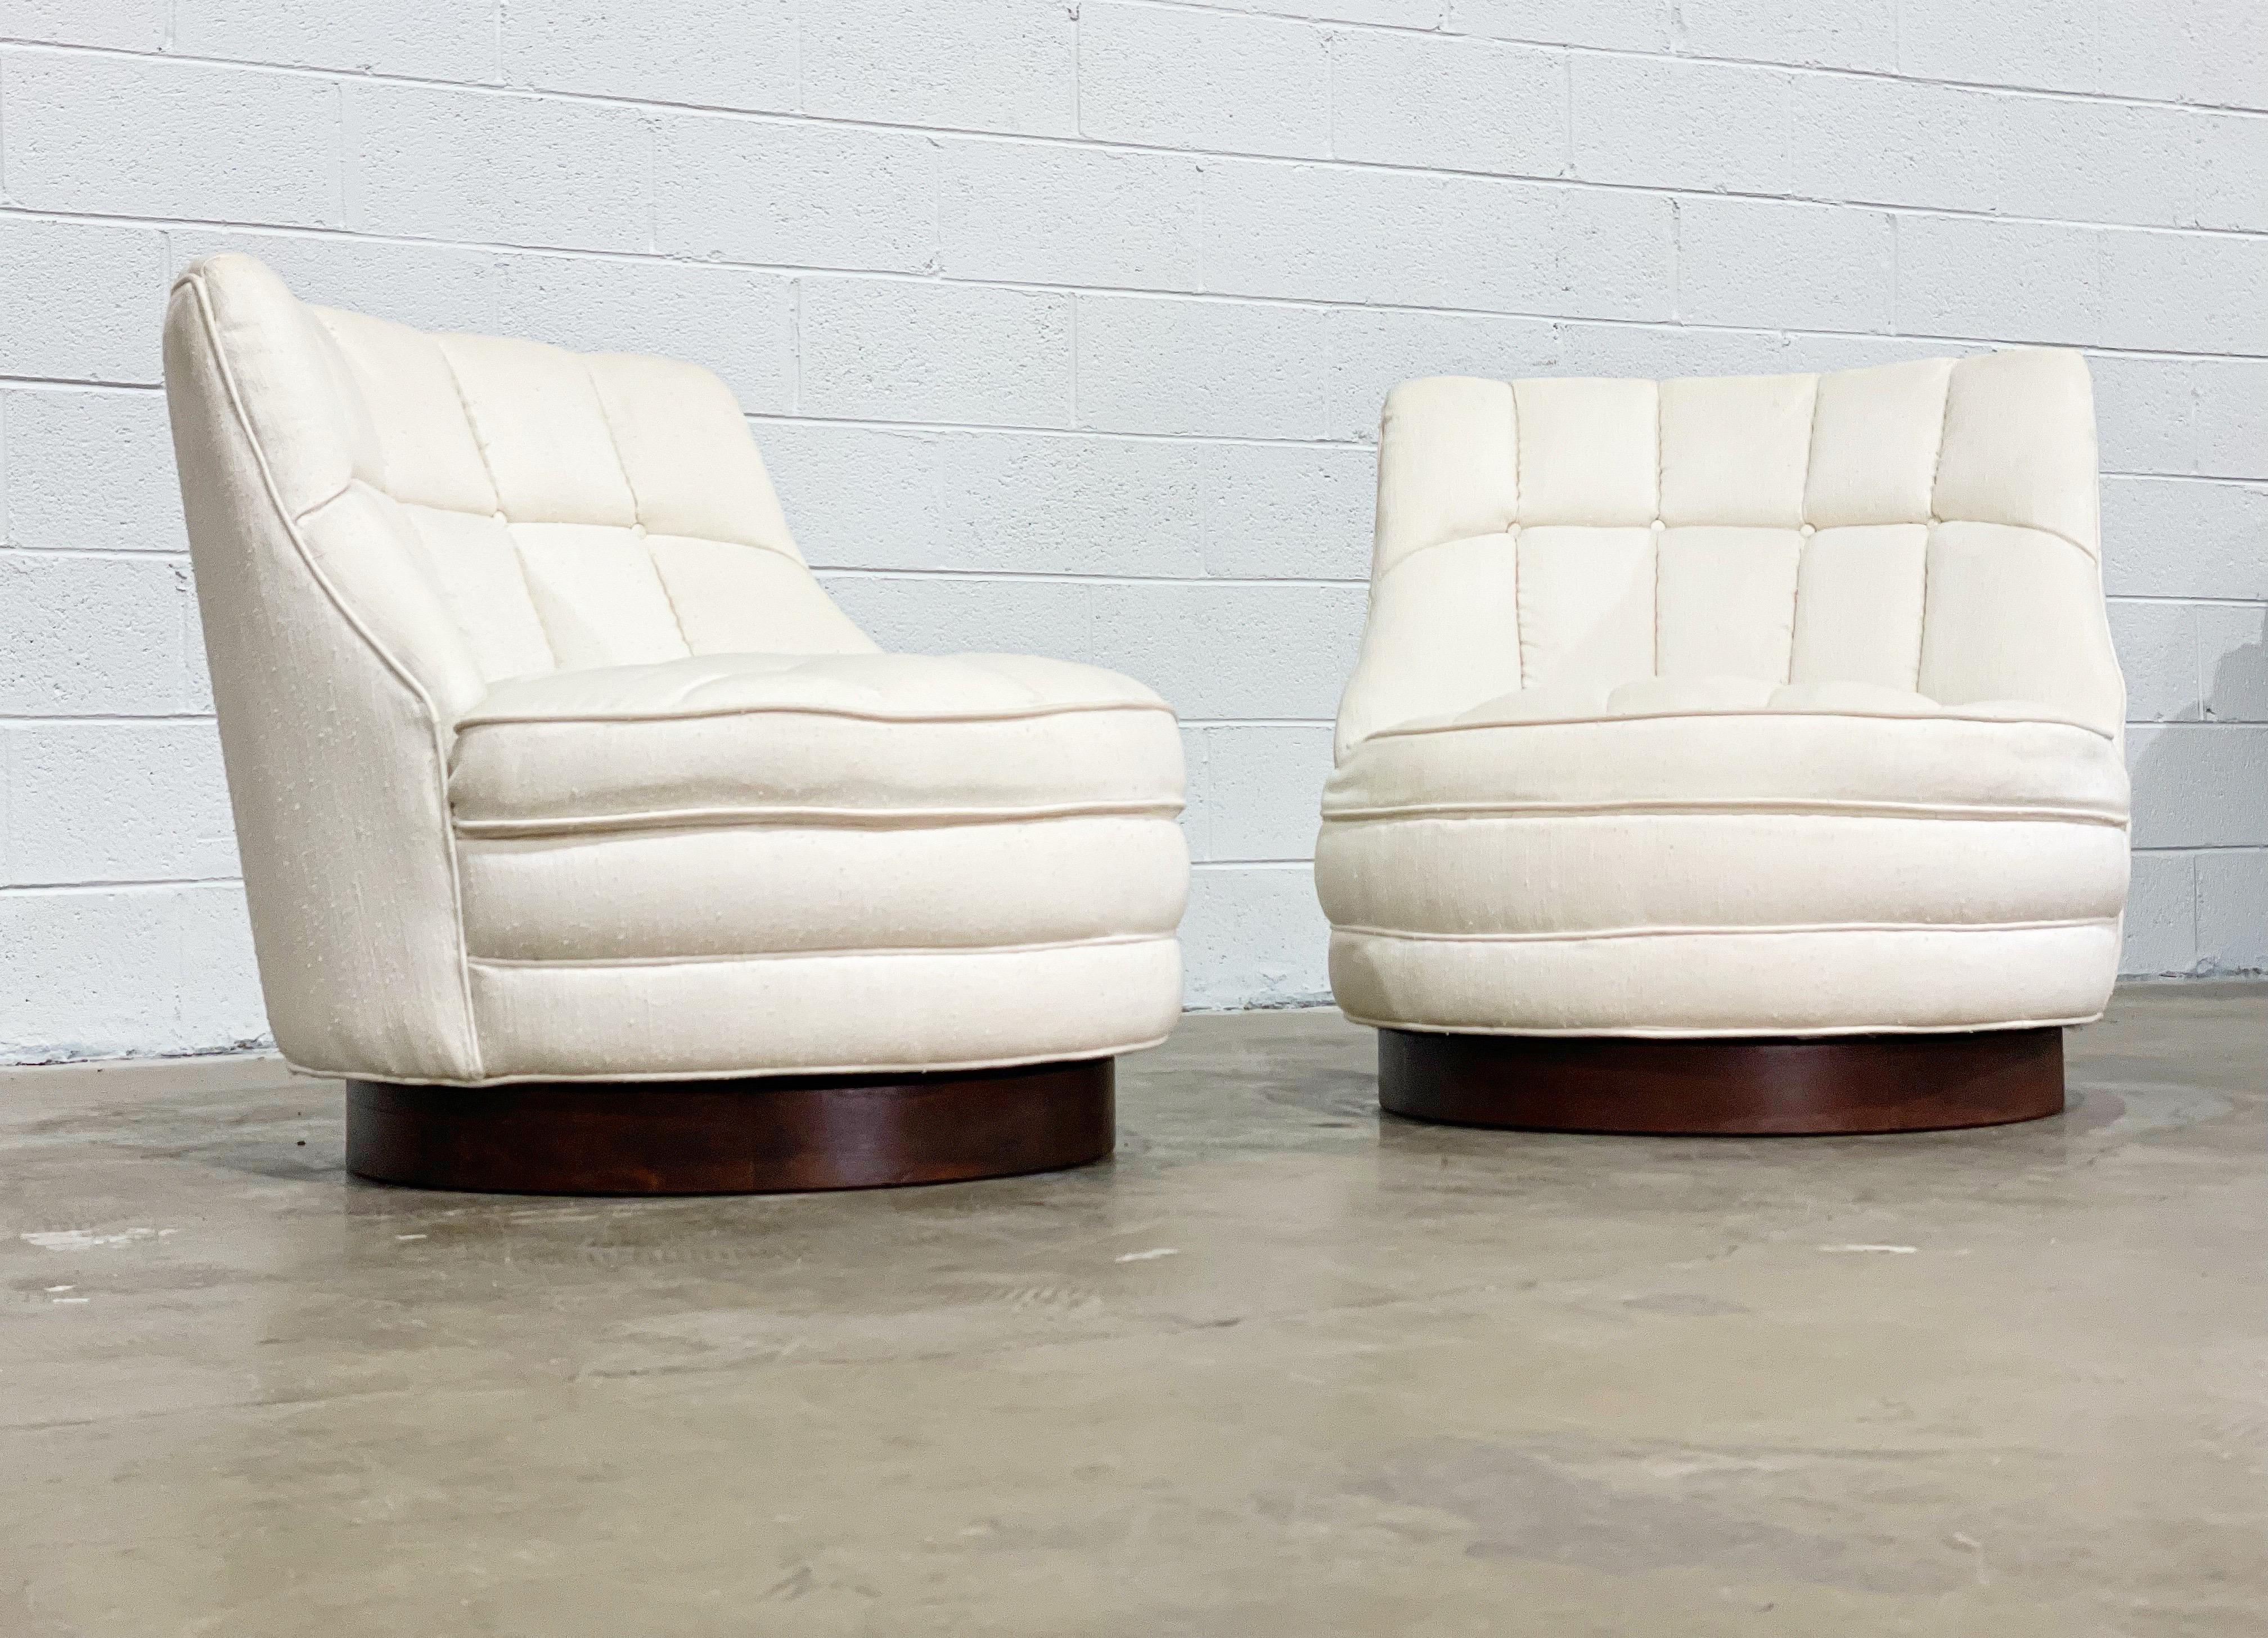 Pair of stunning Mid-Century Modern tufted swivel slipper style barrel chairs with walnut plinth bases by Harvey Probber. Boucle style nubby white upholstery is in good condition and presents well, but does show wear. New upholstery is recommended.